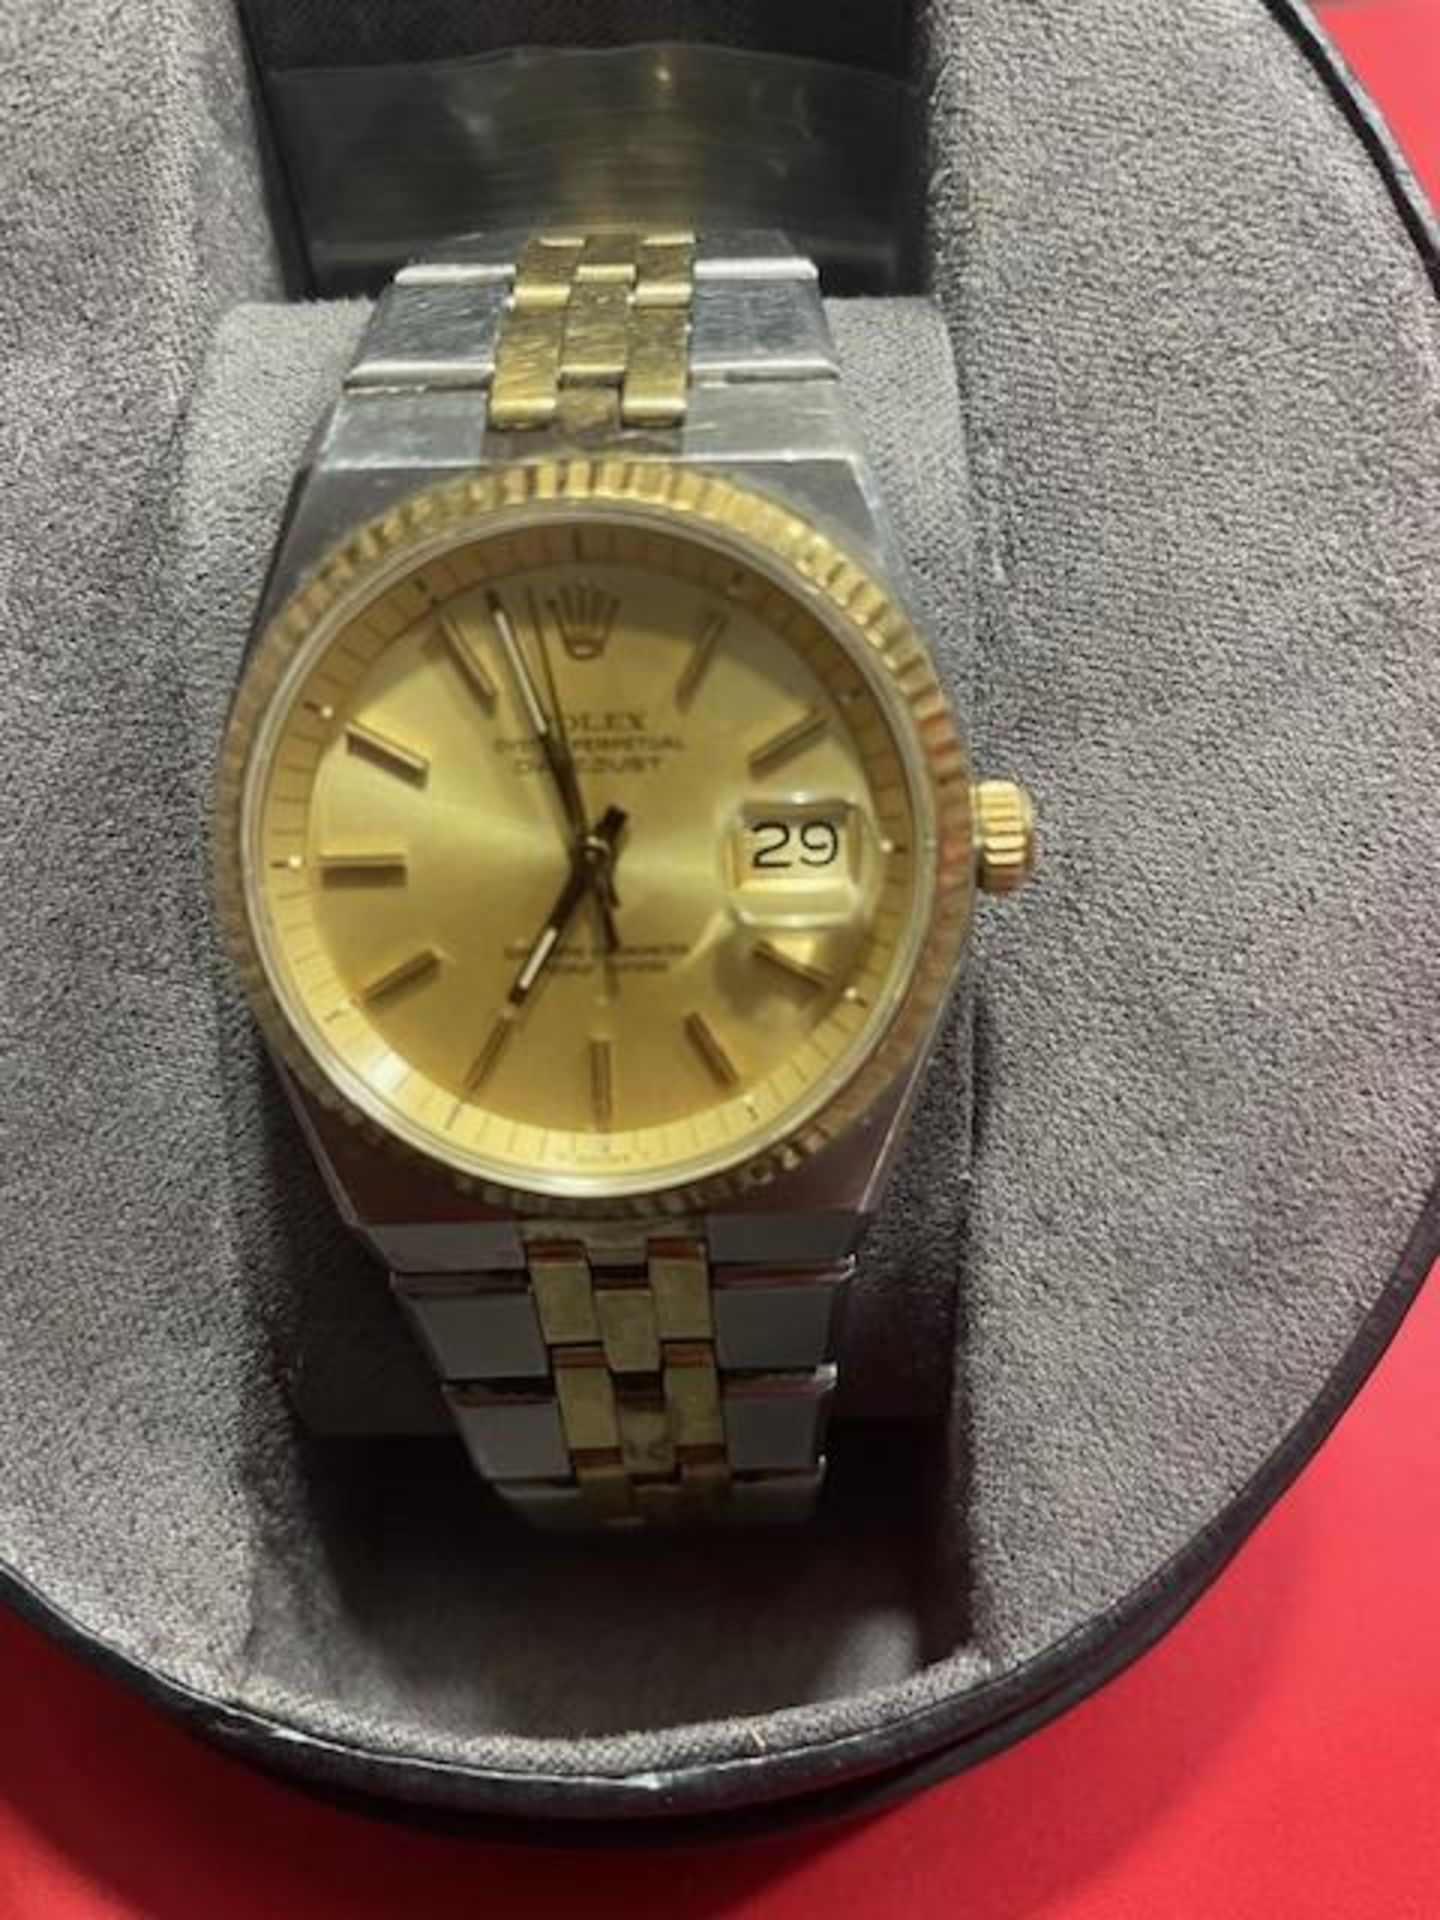 Rolex Oyster Purpetual DATEJUST Mens Watch - Image 2 of 15